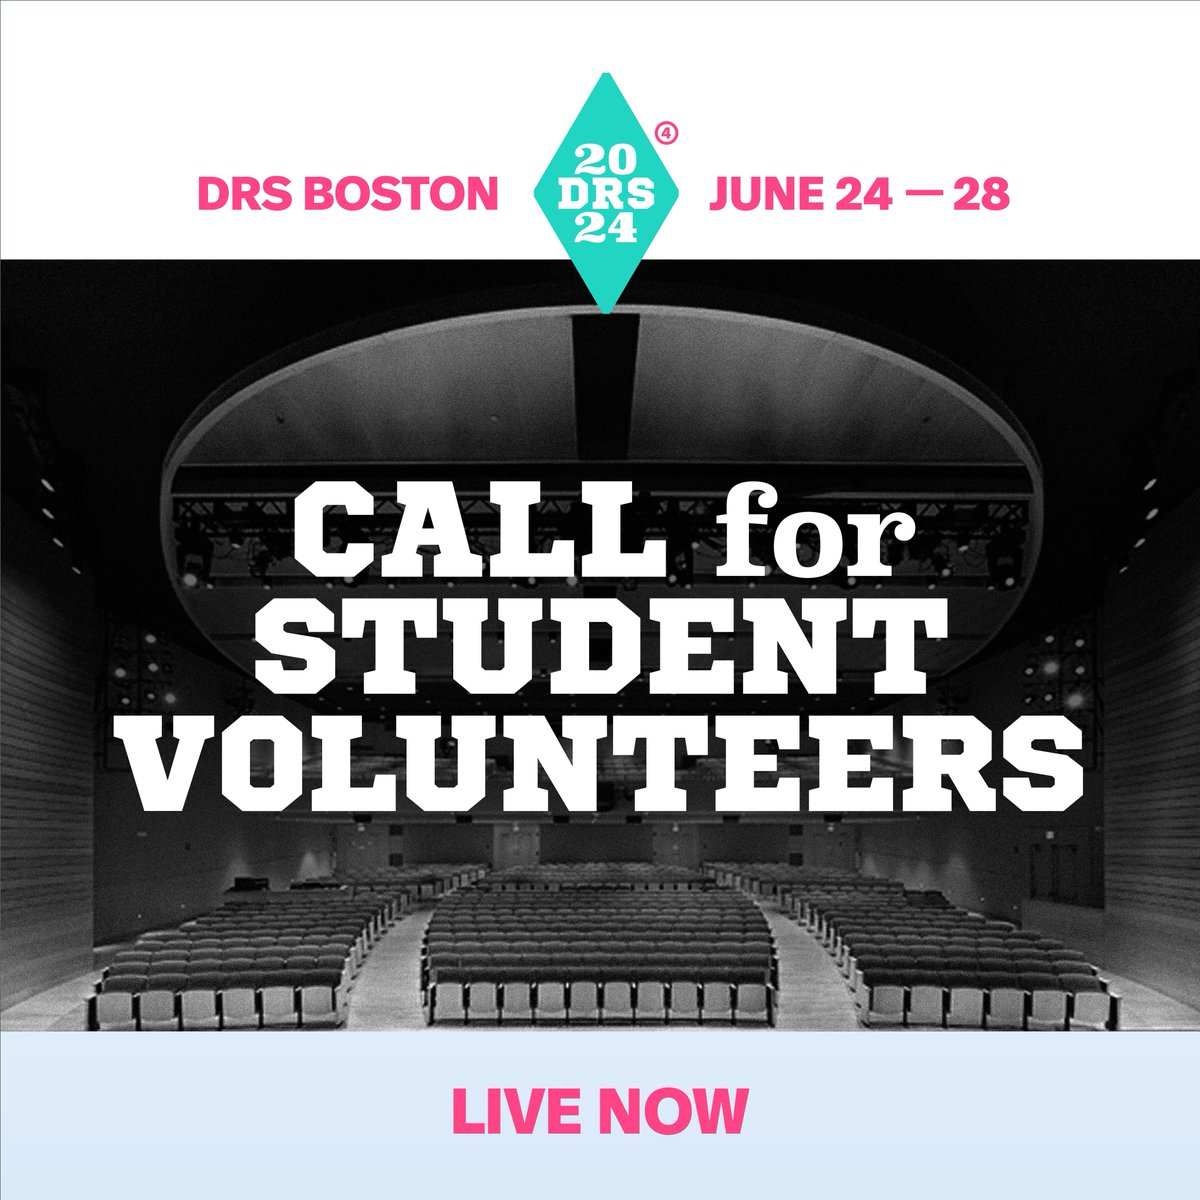 Apply by April 9: The call for student volunteers for the Design Research Society (DRS) conference is NOW OPEN! 🥳 Volunteers dedicate 20-30 hours during the week of the conference, in-person and online. buff.ly/4cMTfvc @NU_CfD, @newurbanmechs, @mfaboston, @harvardgsd